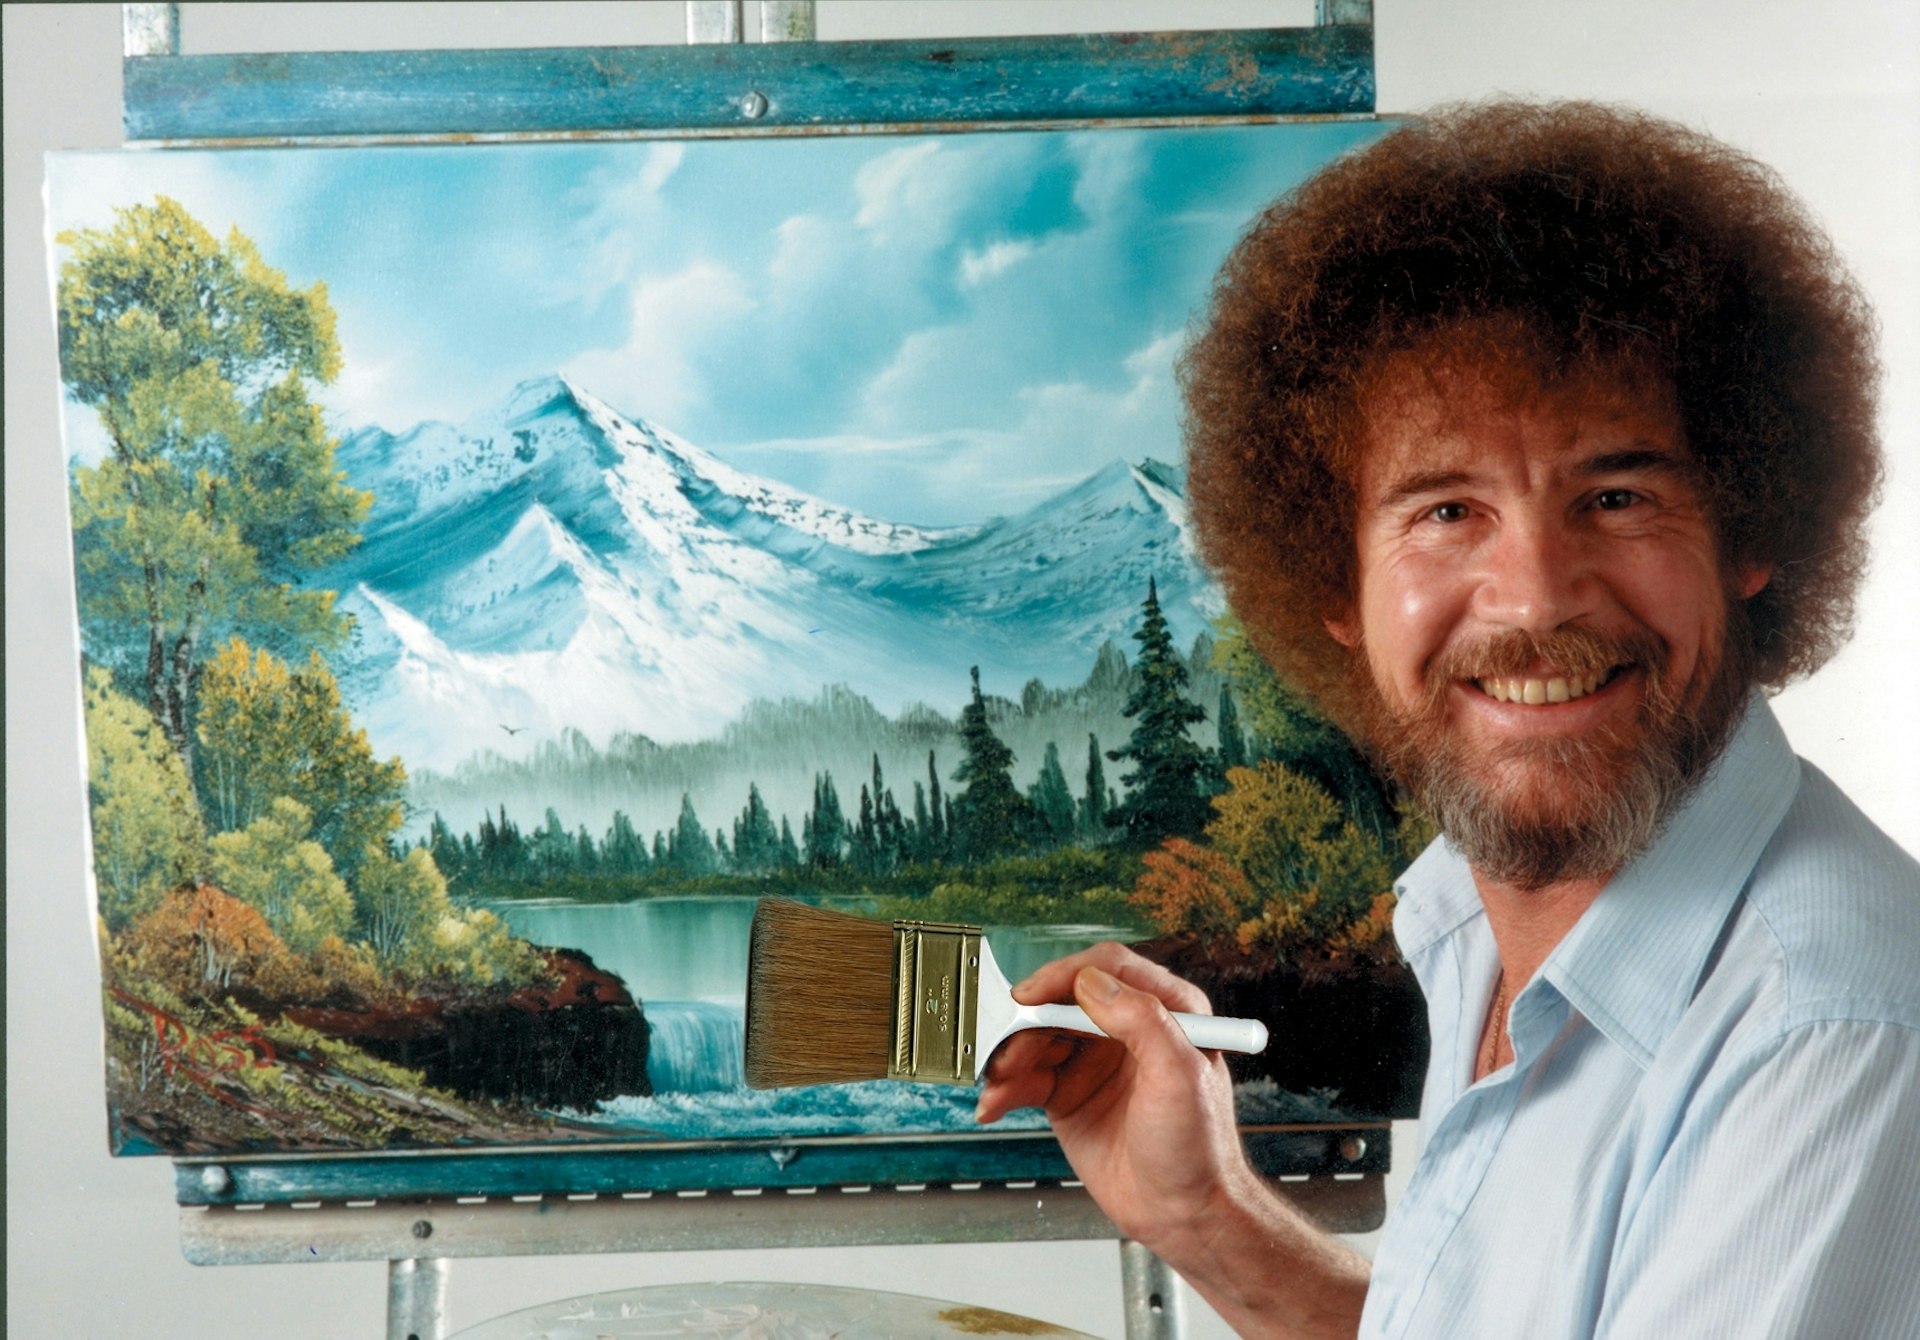 Happy accidents: revisiting the dreamy, DIY world of Bob Ross